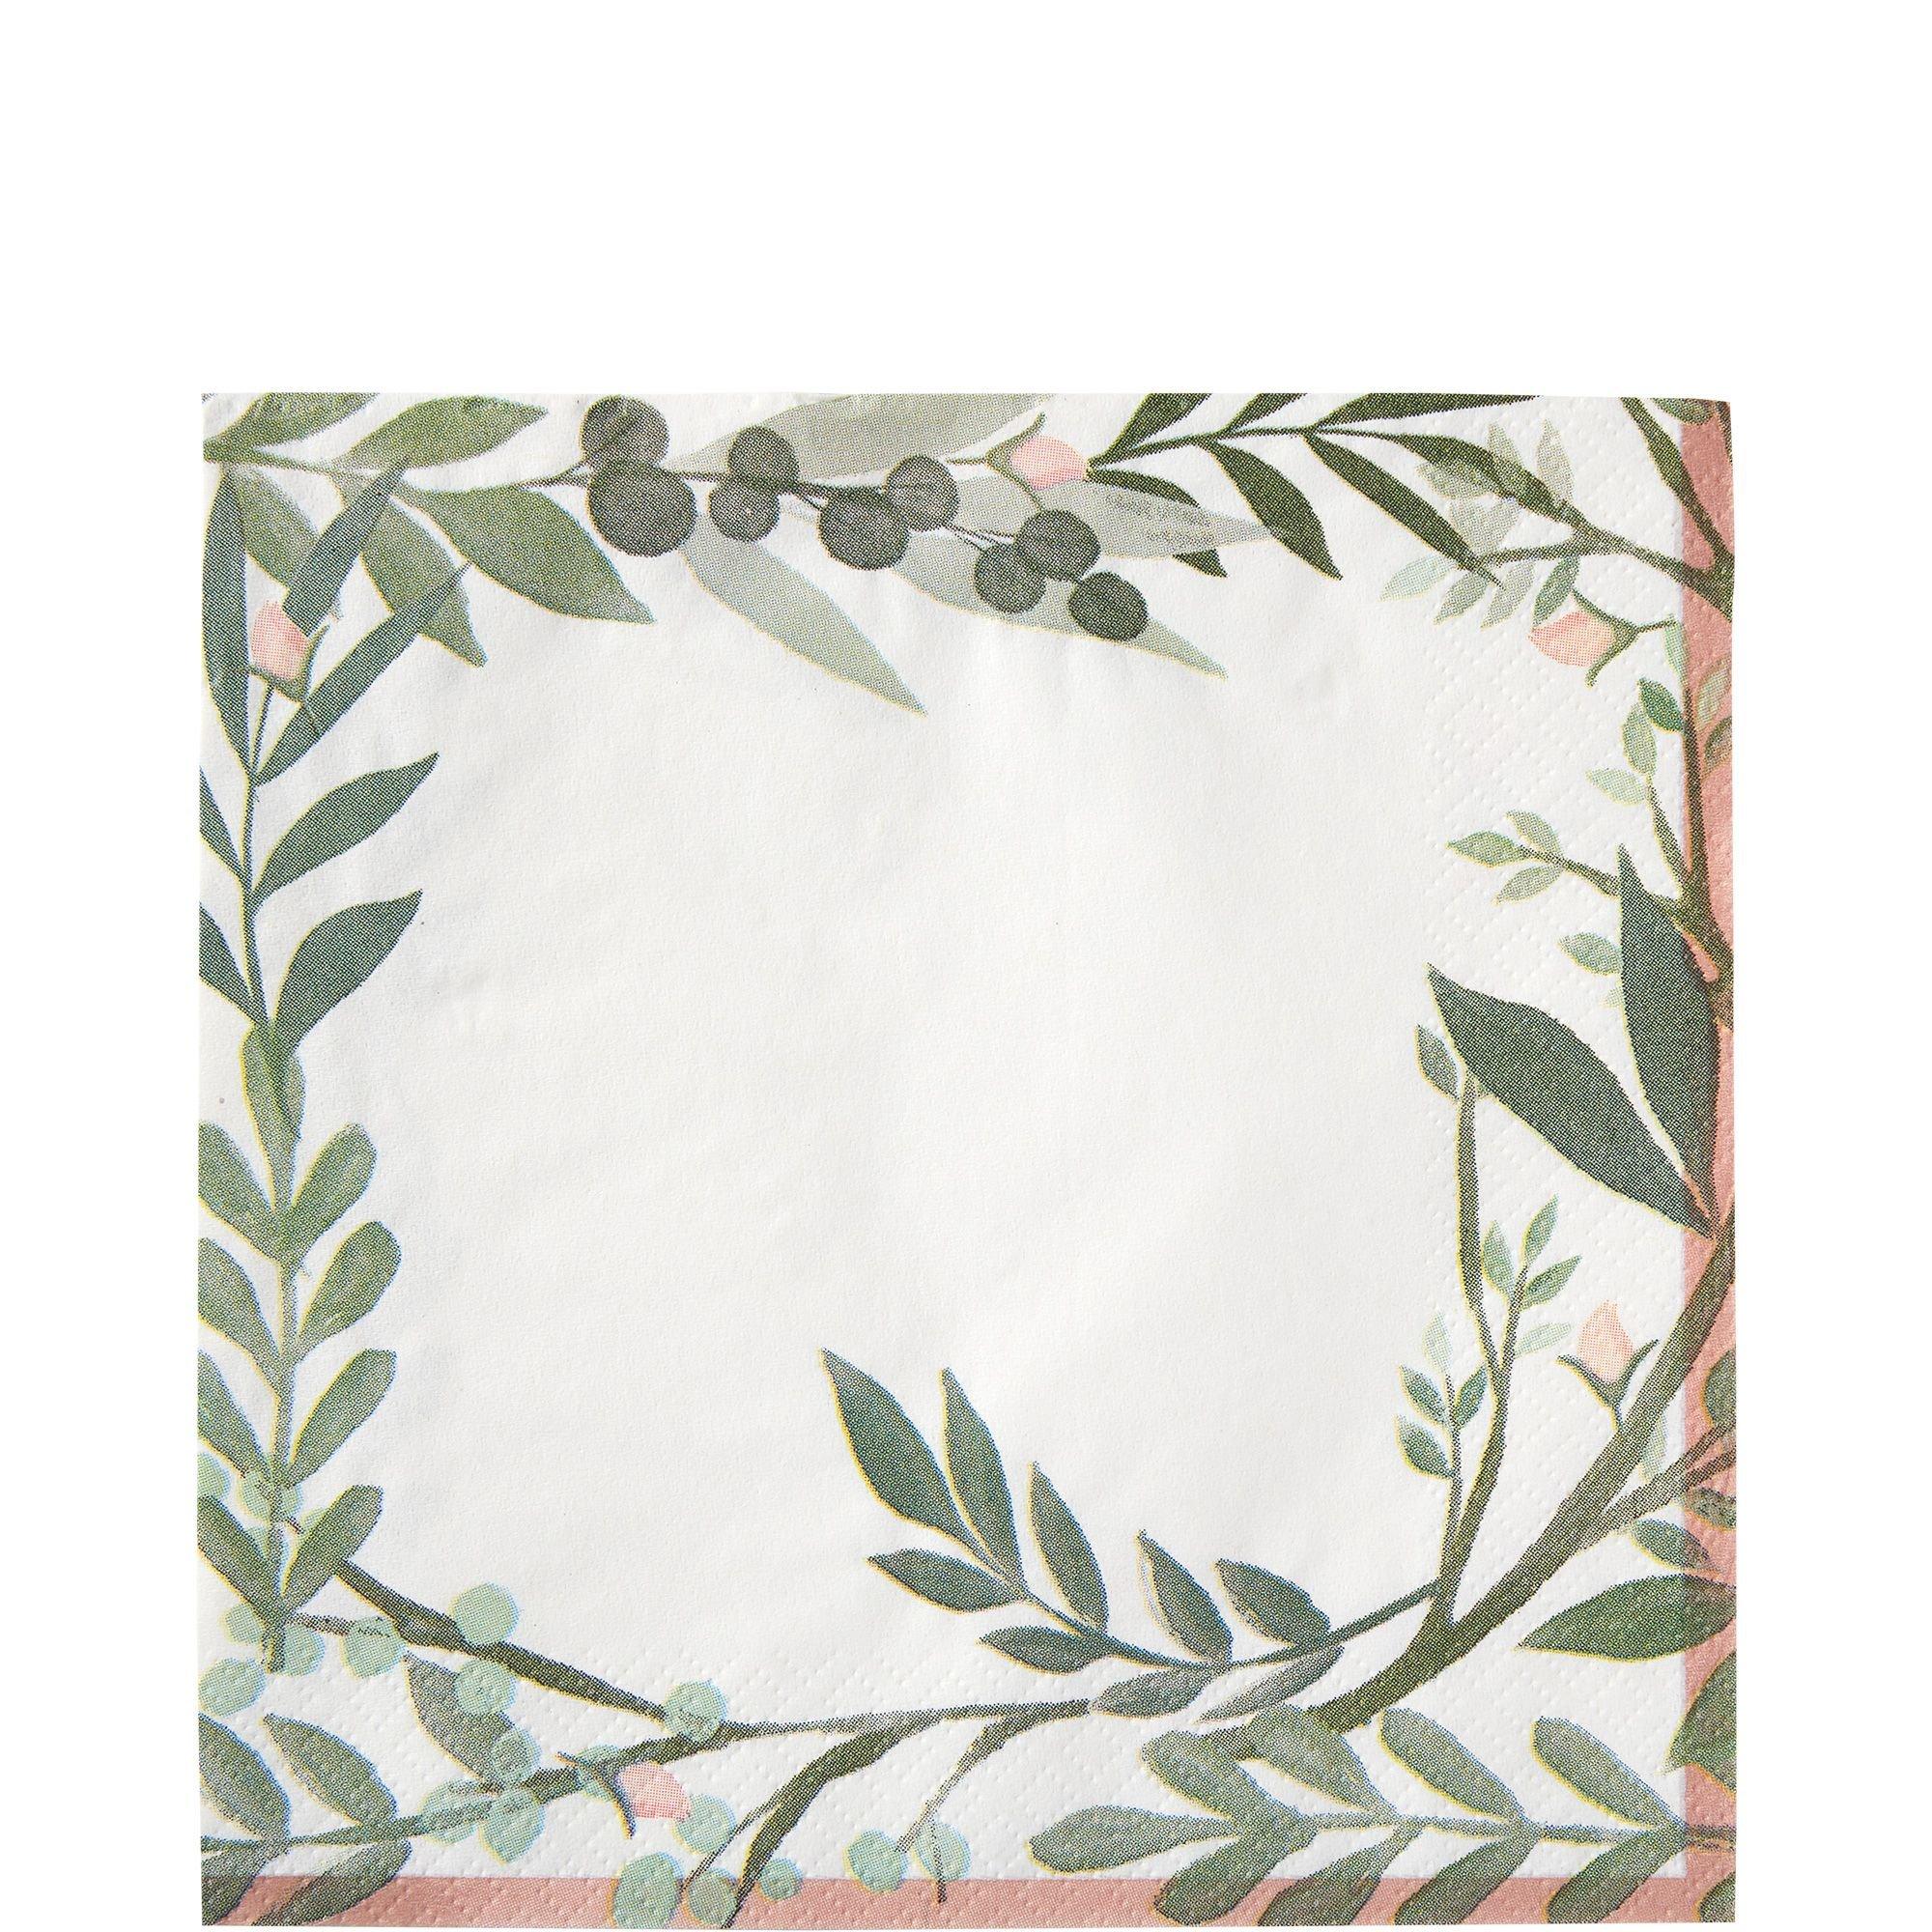 Floral Greenery Lunch Napkins 16ct 